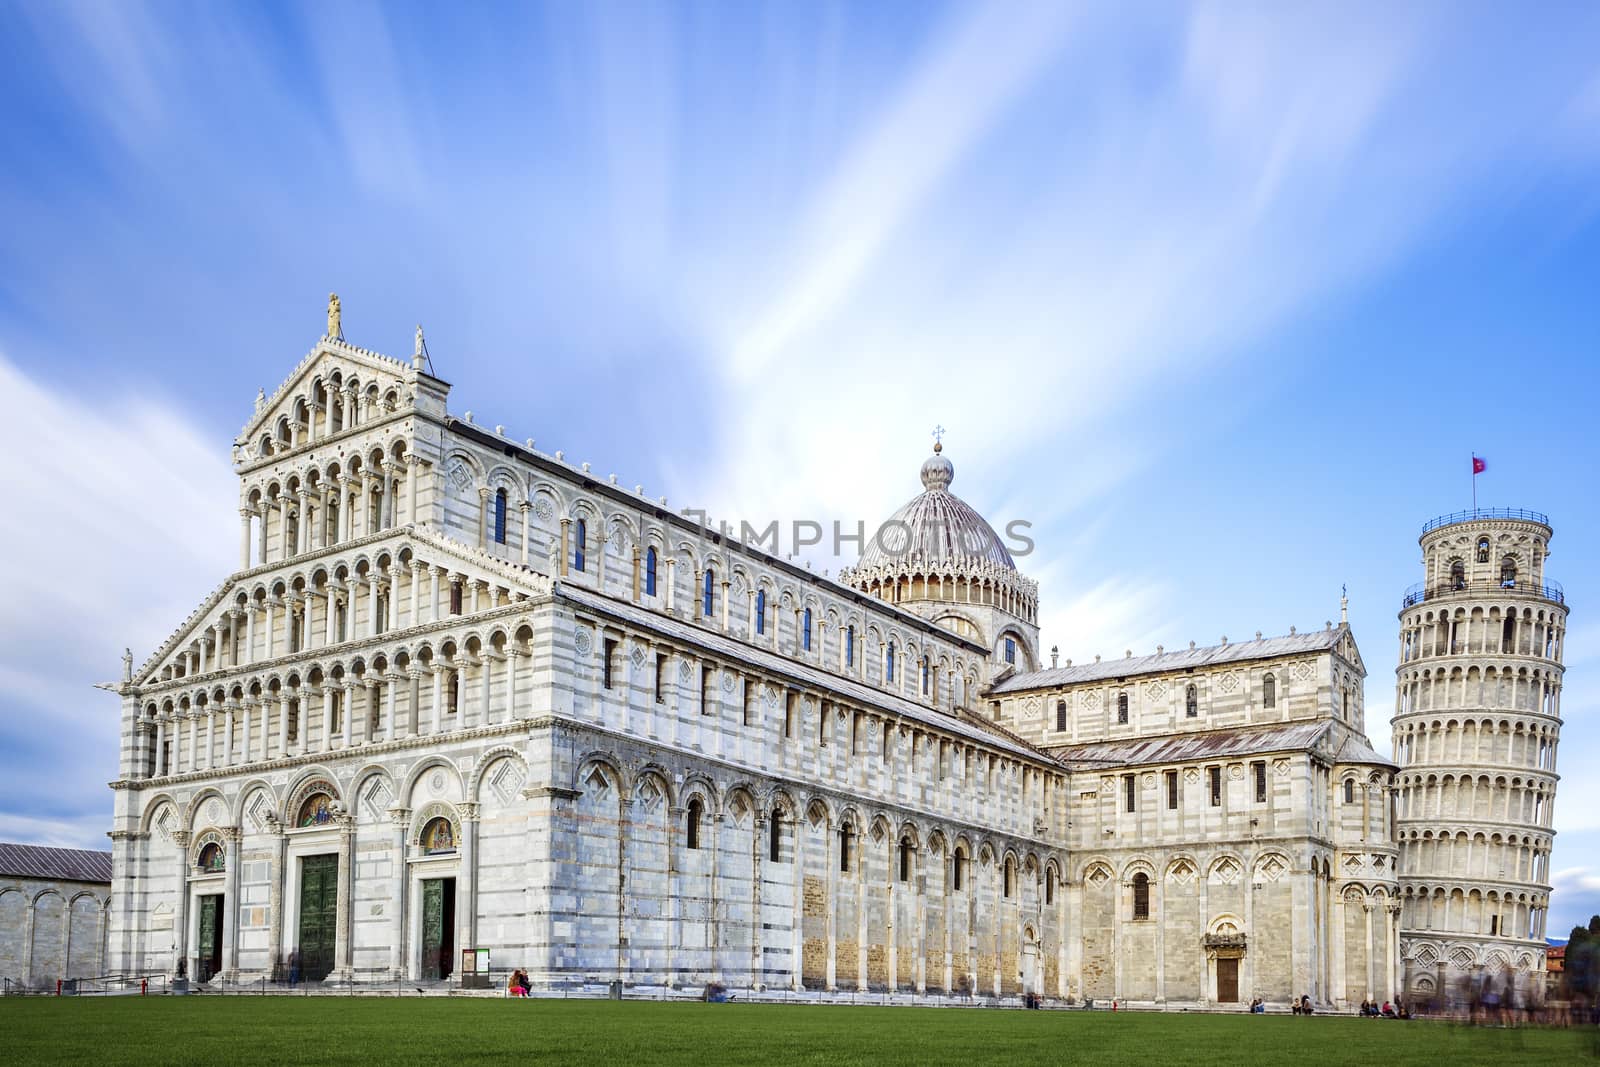 image of the great Piazza Miracoli in Pisa Italy 